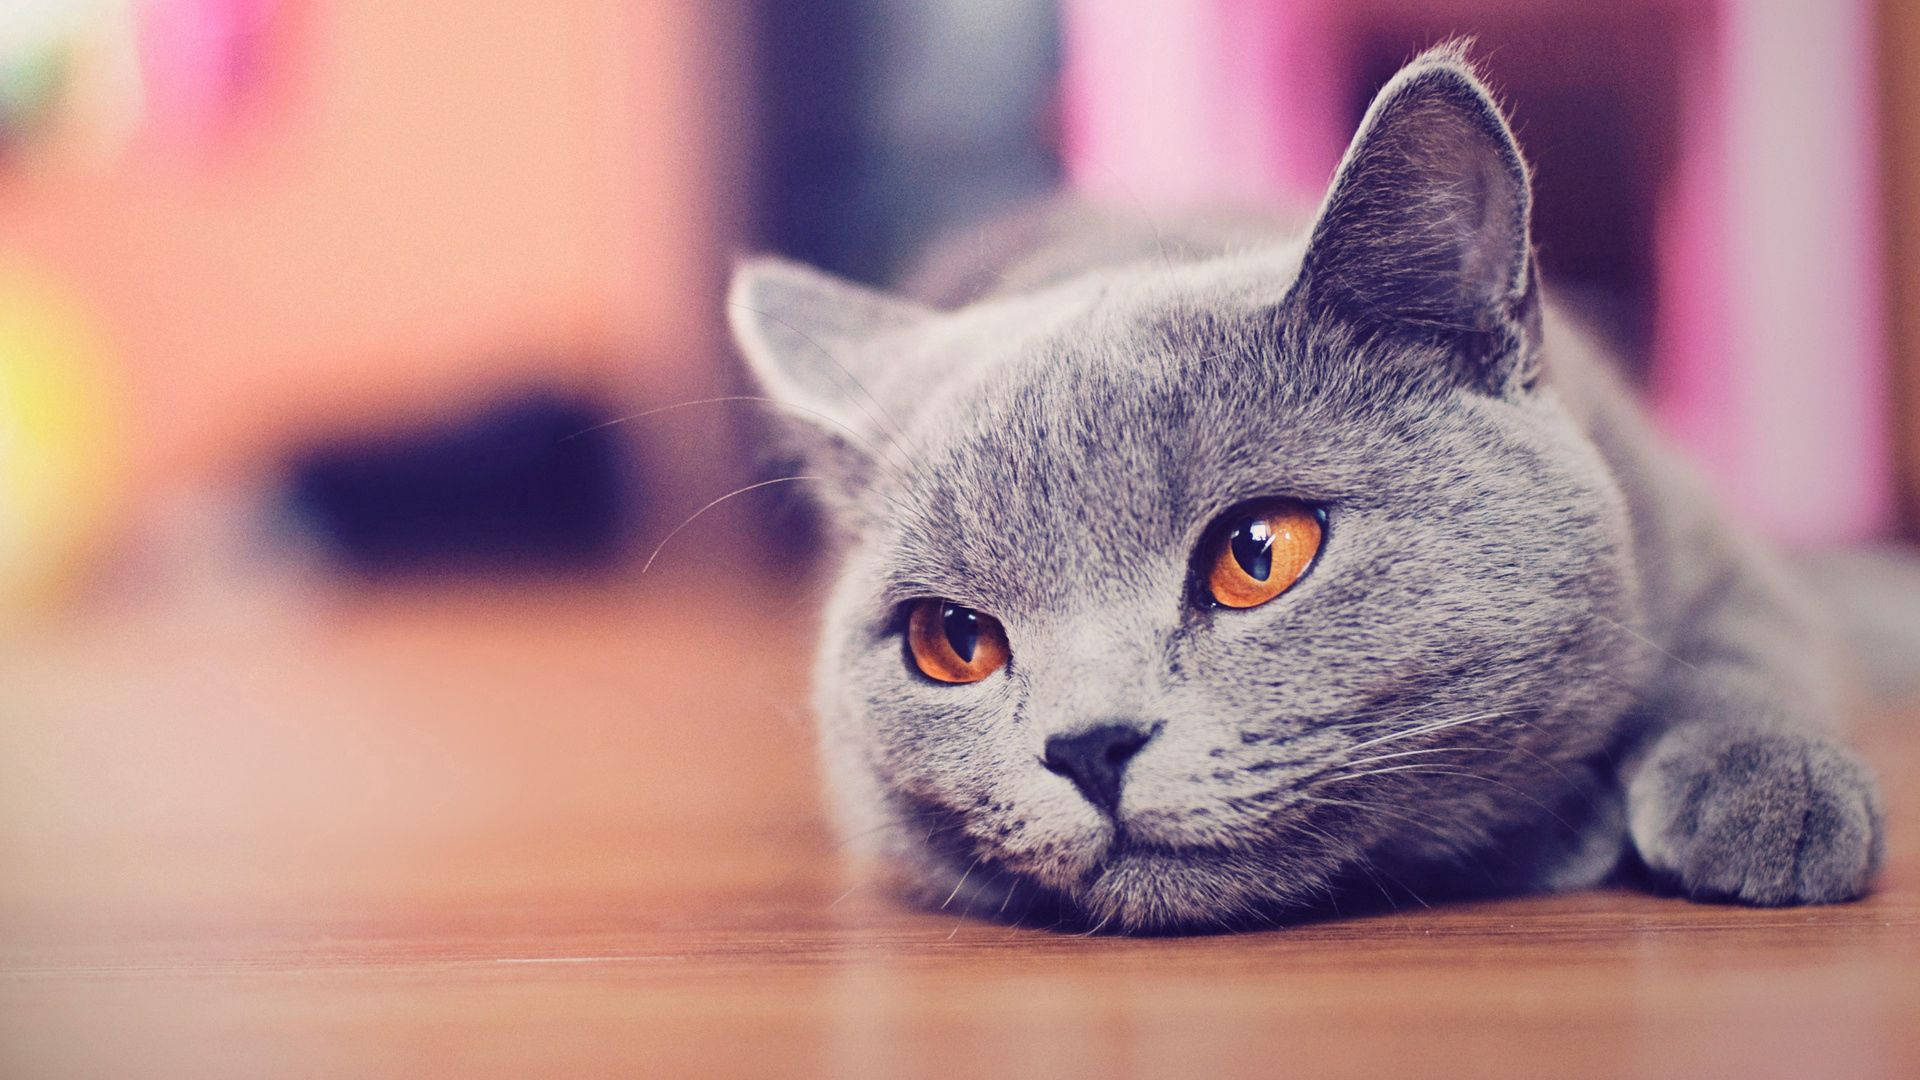 Cat 1920X1080 Wallpaper and Background Image